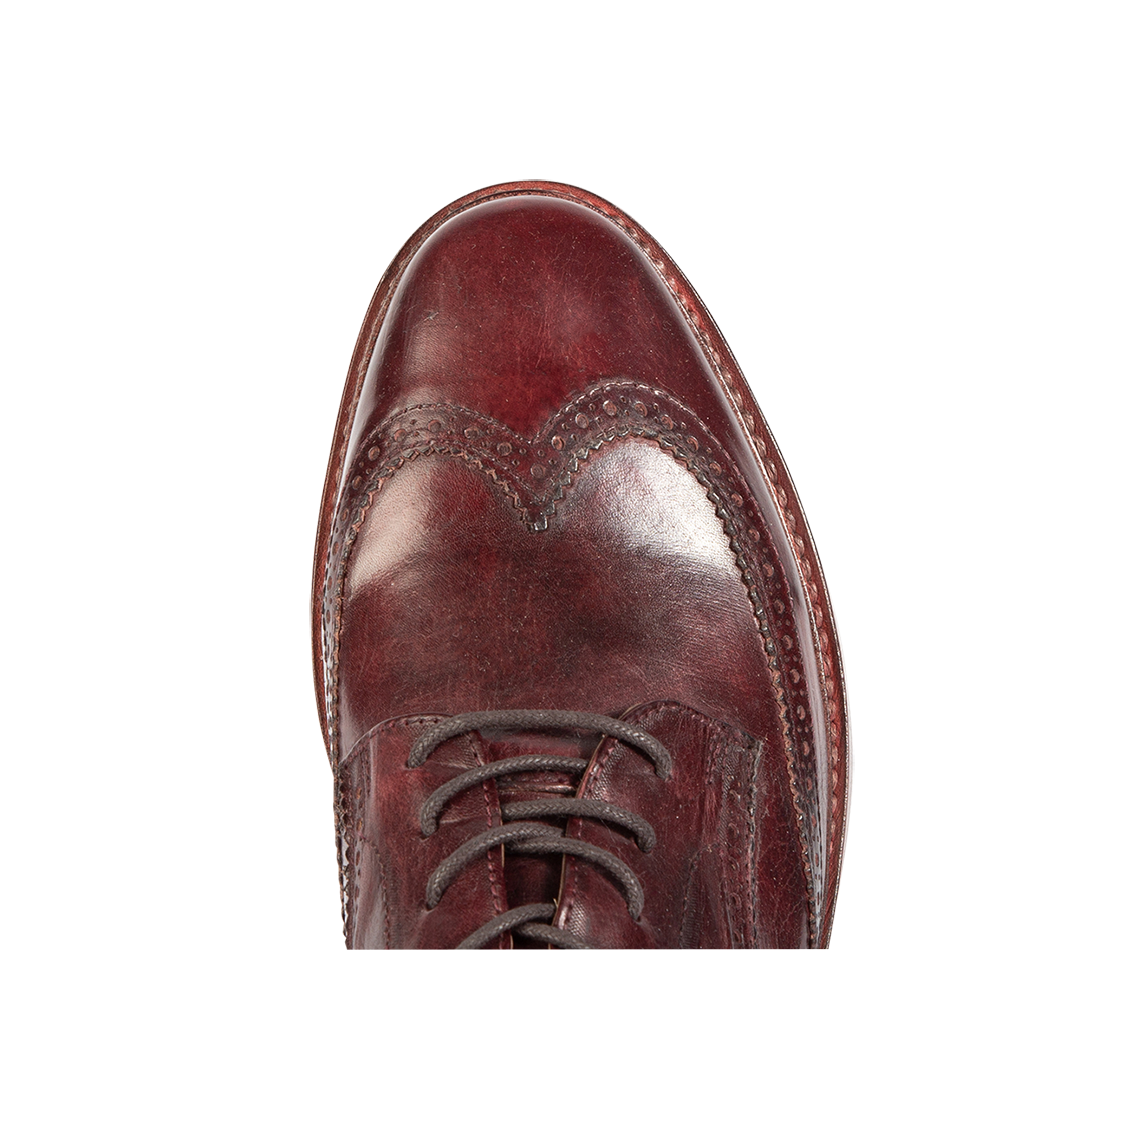 Top view showing wingtip toe and loafer construction on FREEBIRD men's Kensington wine shoe